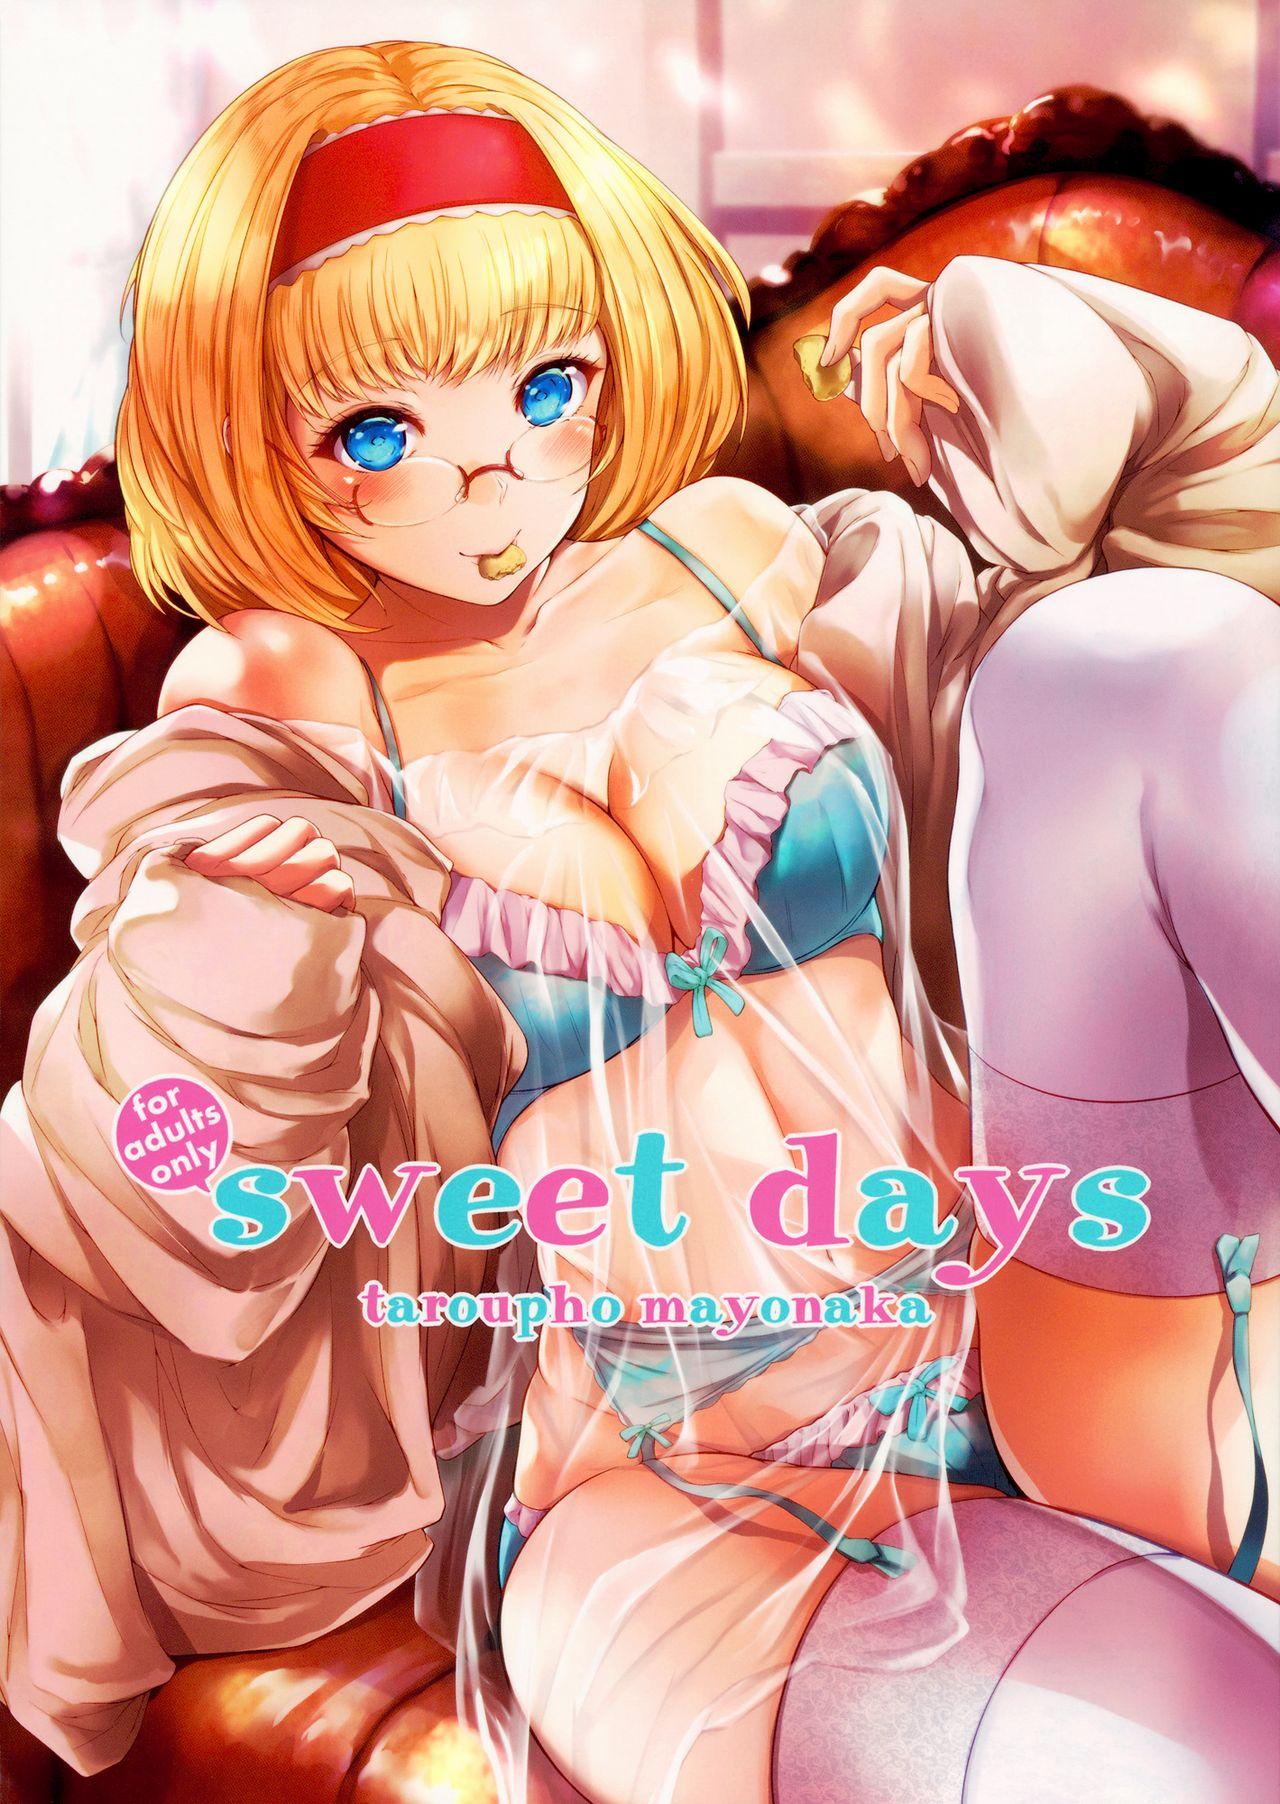 Pure 18 Sweet days - Touhou project Hardcore Porn - Page 2